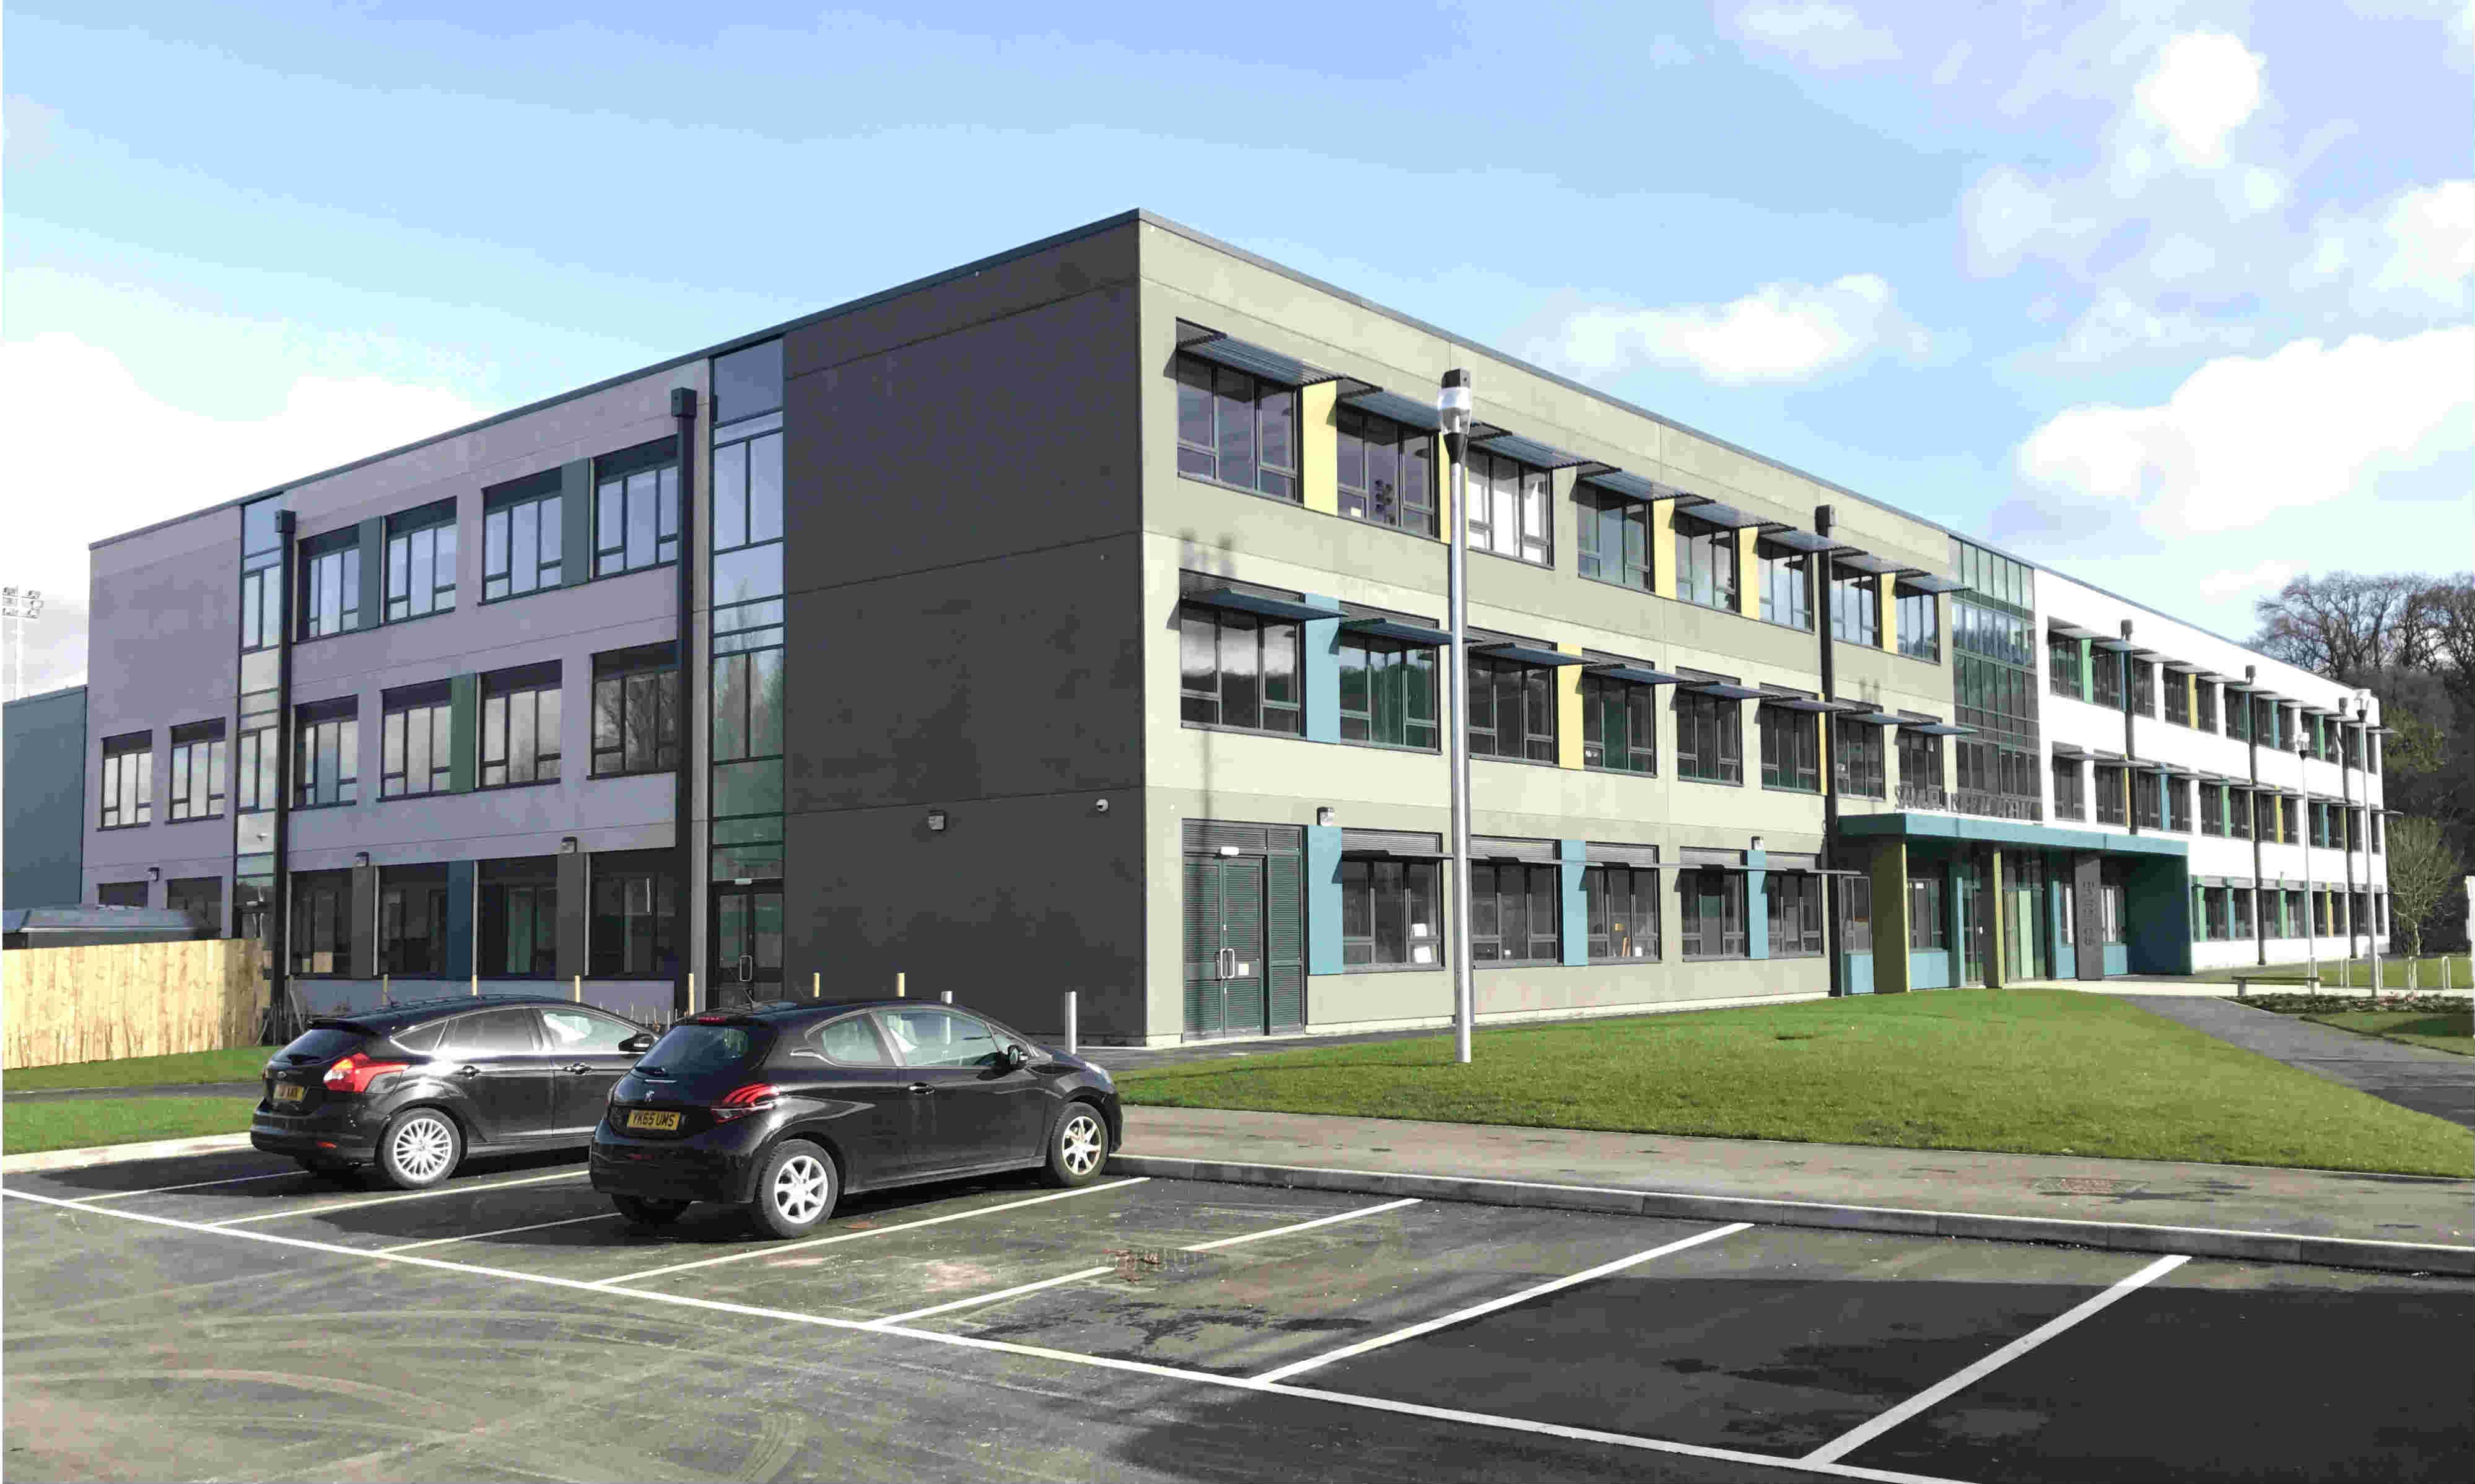 The first three schools of the Yorkshire batch of the Priority Schools Building Programme are complete